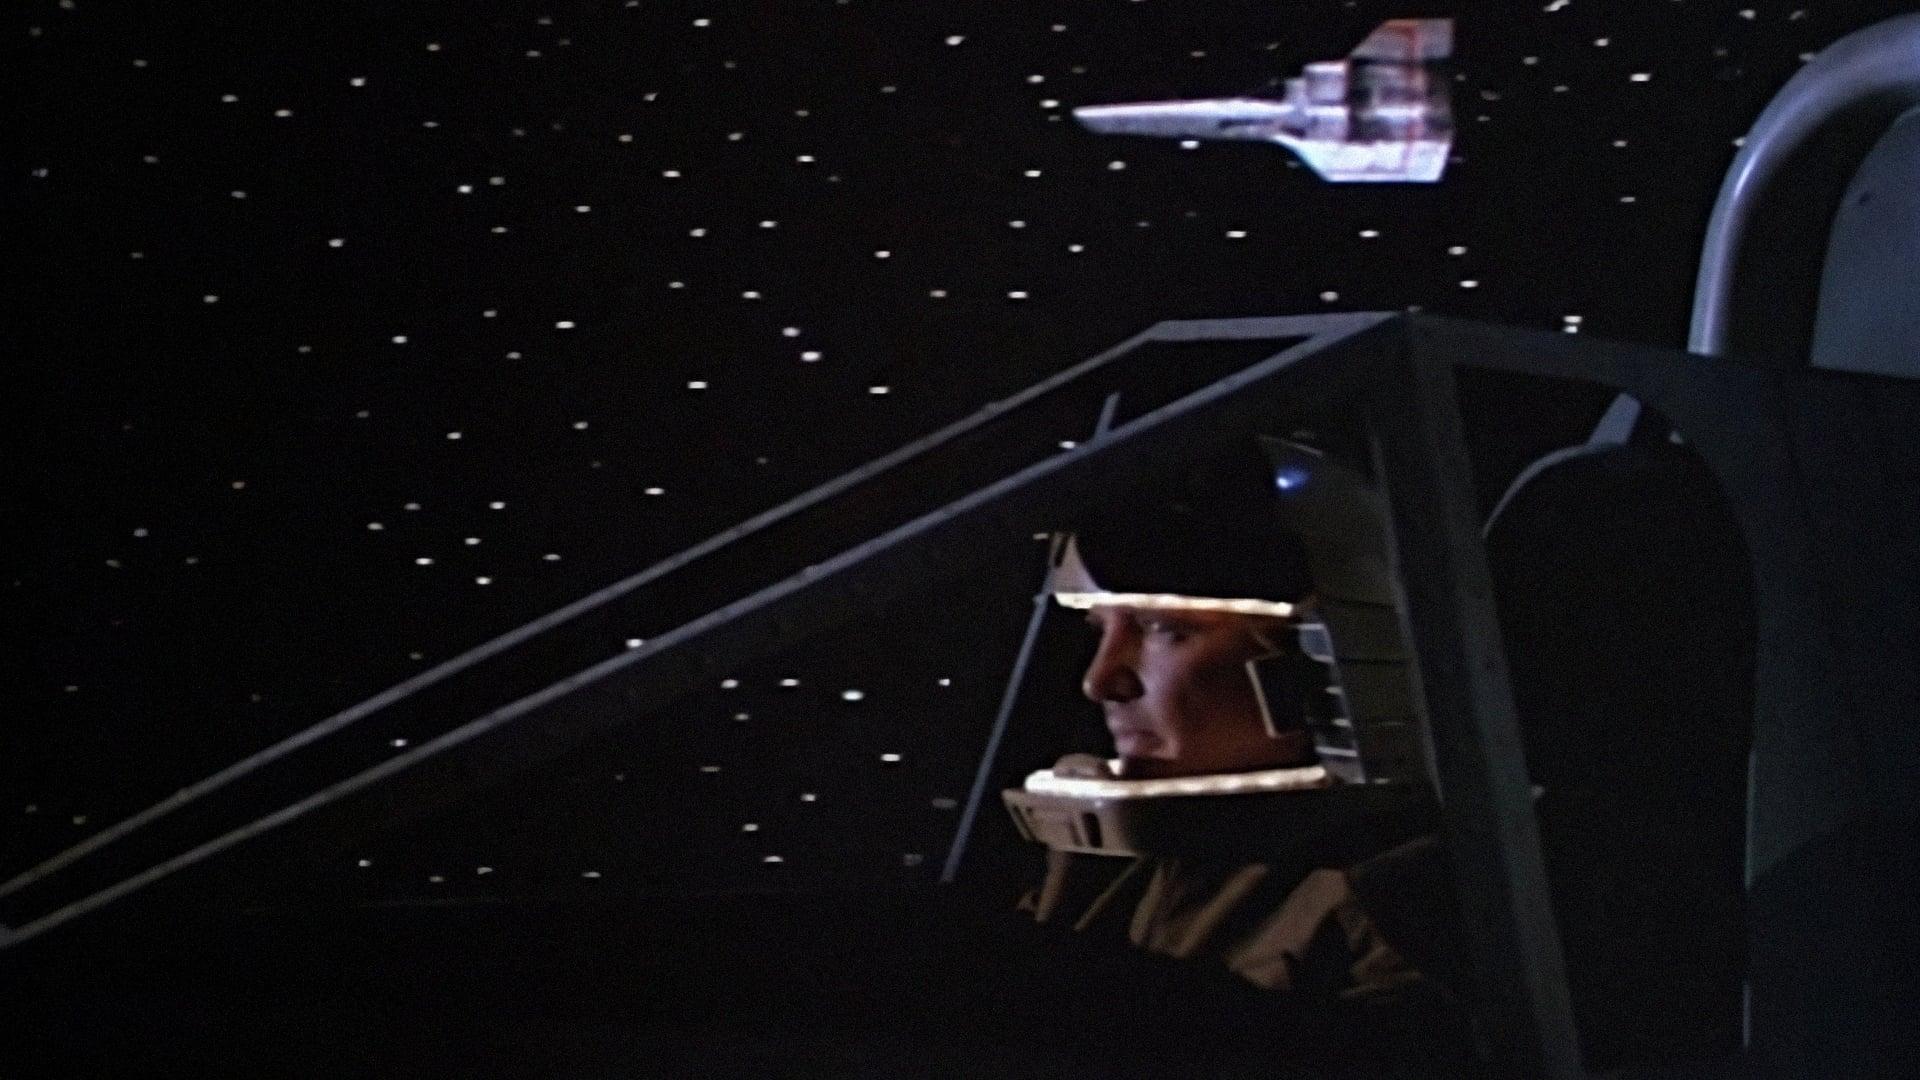 Mission Galactica: The Cylon Attack backdrop